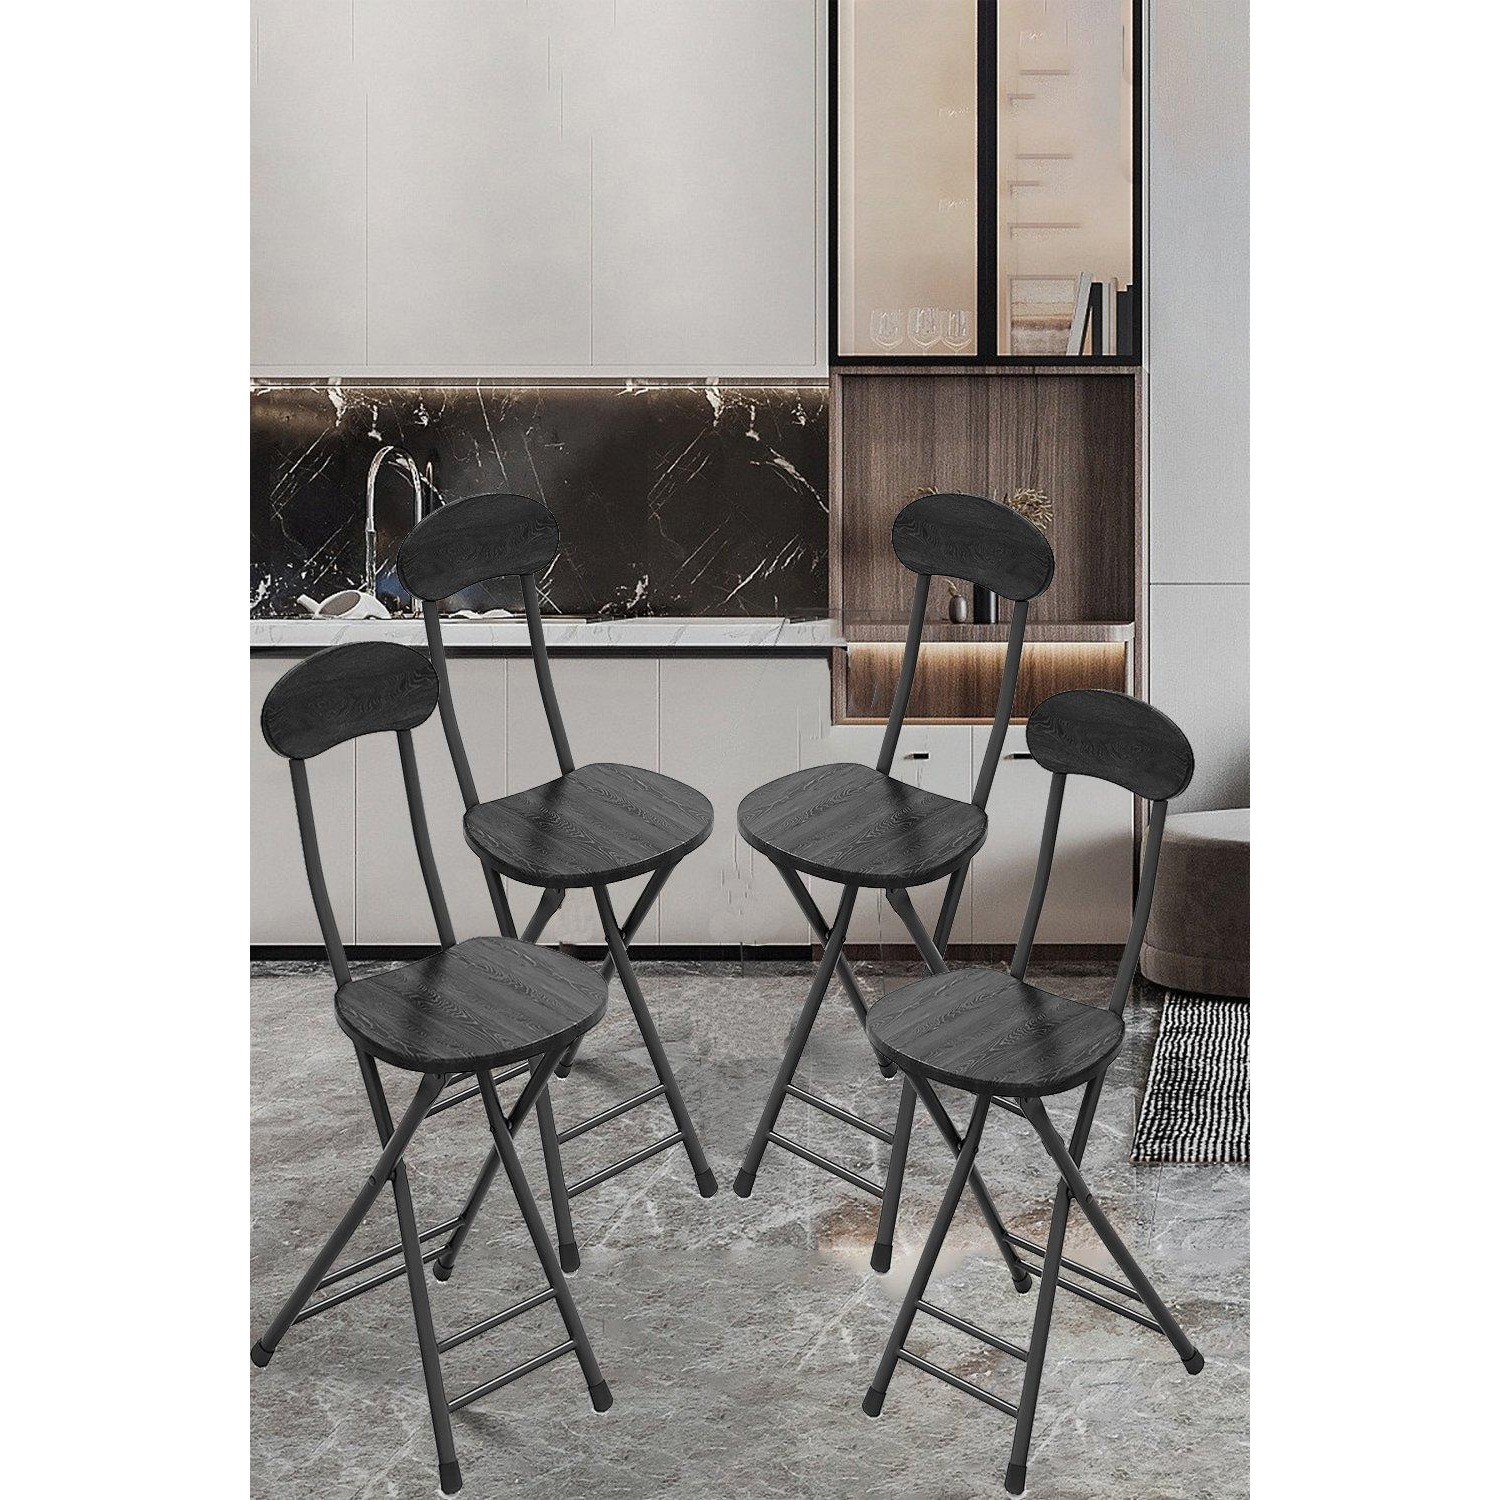 Set of 4 Compact Wooden Black Folding Chair with Metal Legs - image 1